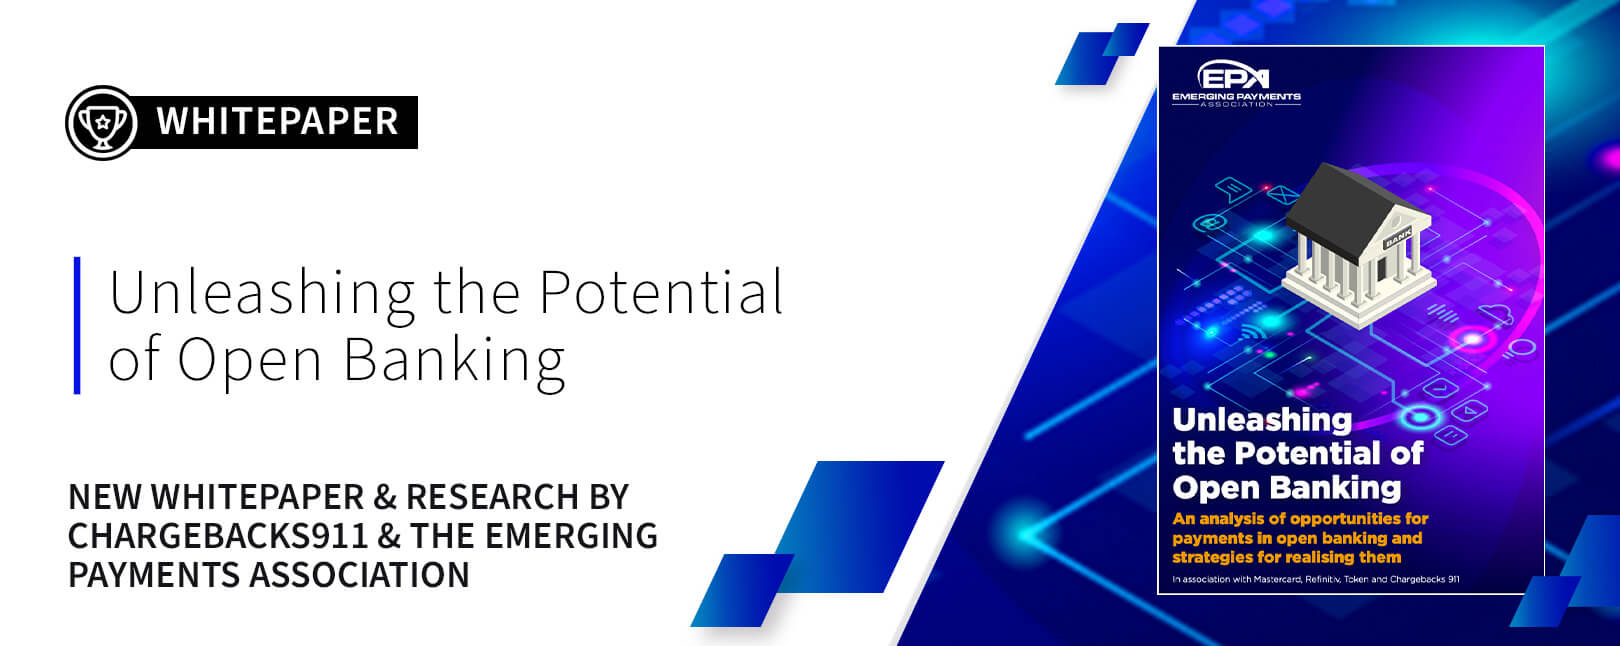 New Study: UNLEASHING THE POTENTIAL OF OPEN BANKING, from Chargebacks911® & EPA